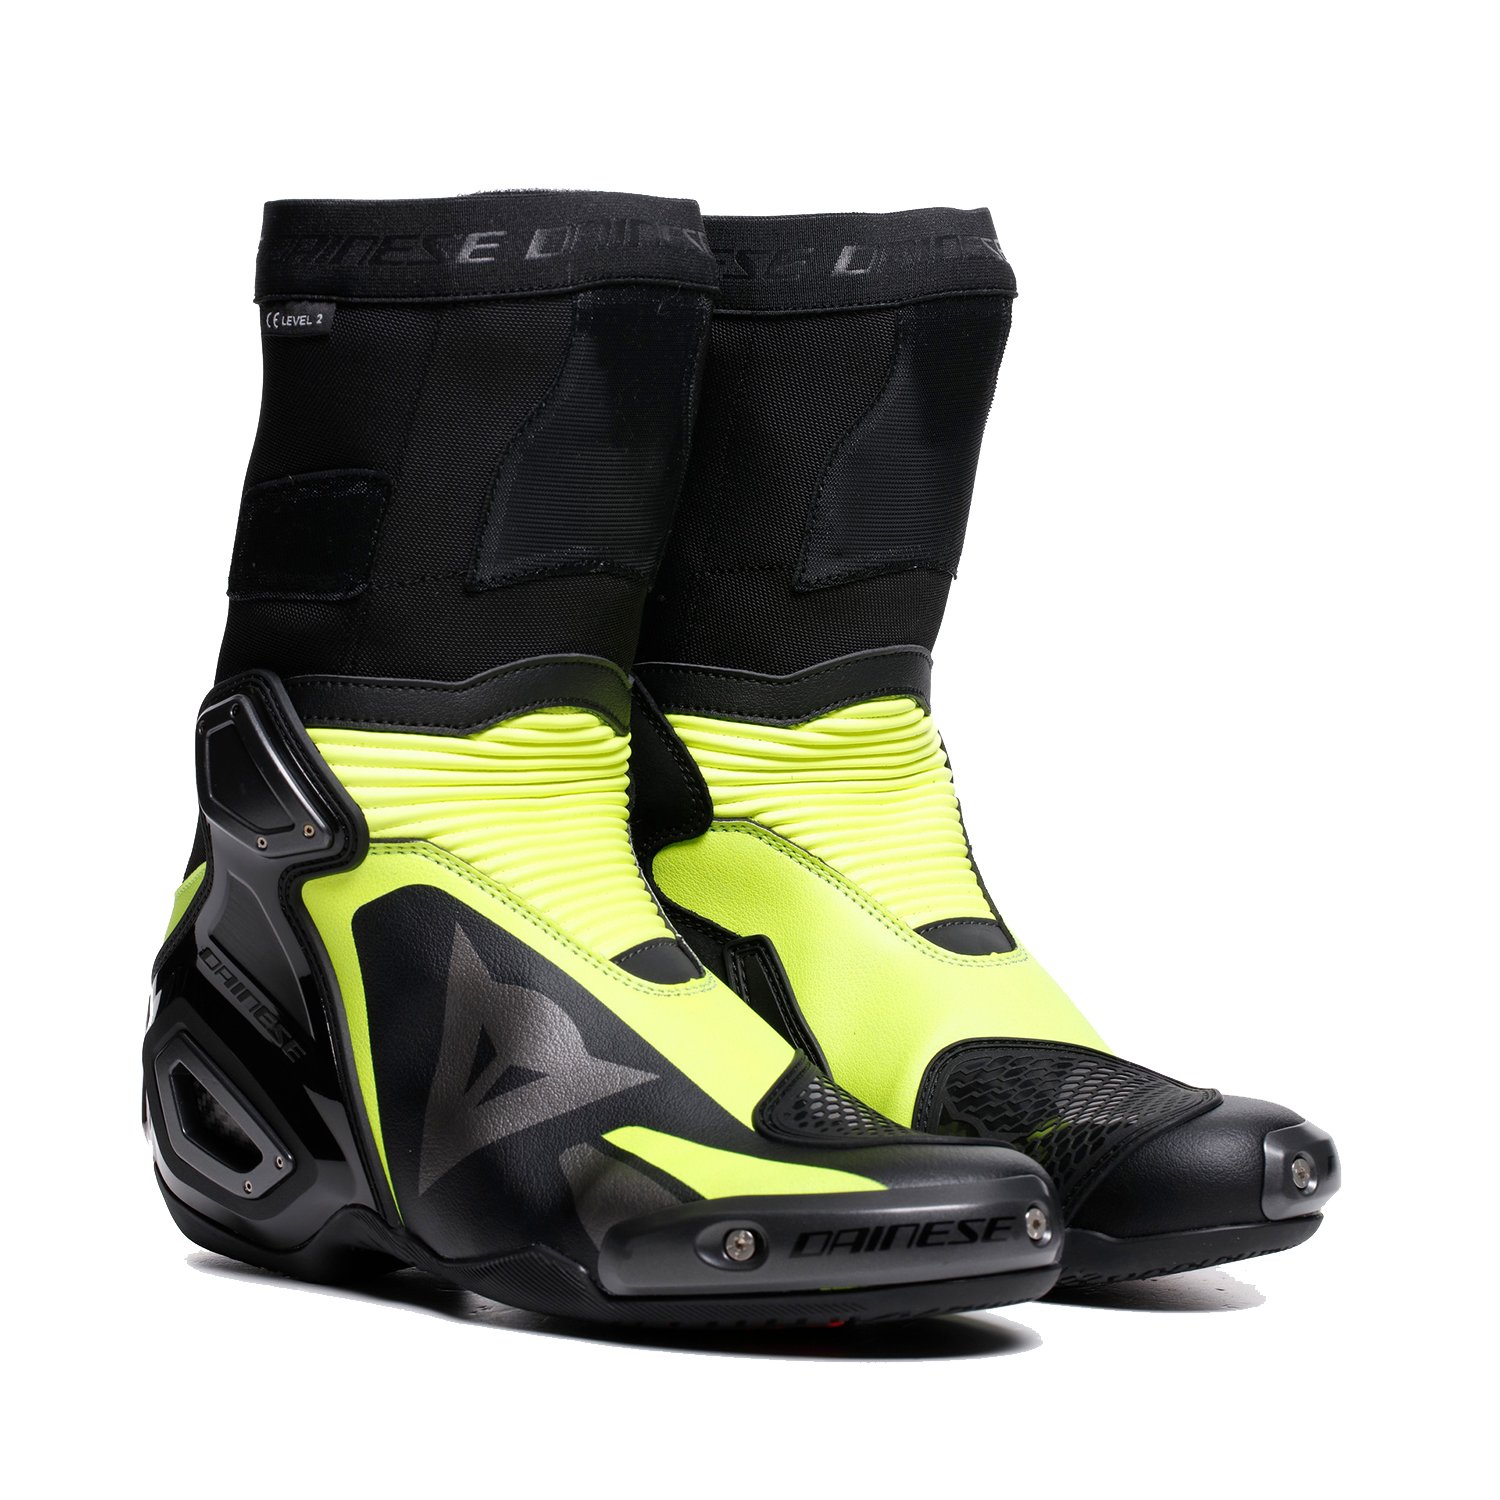 Image of Dainese Axial 2 Boots Black Yellow Fluo Talla 44